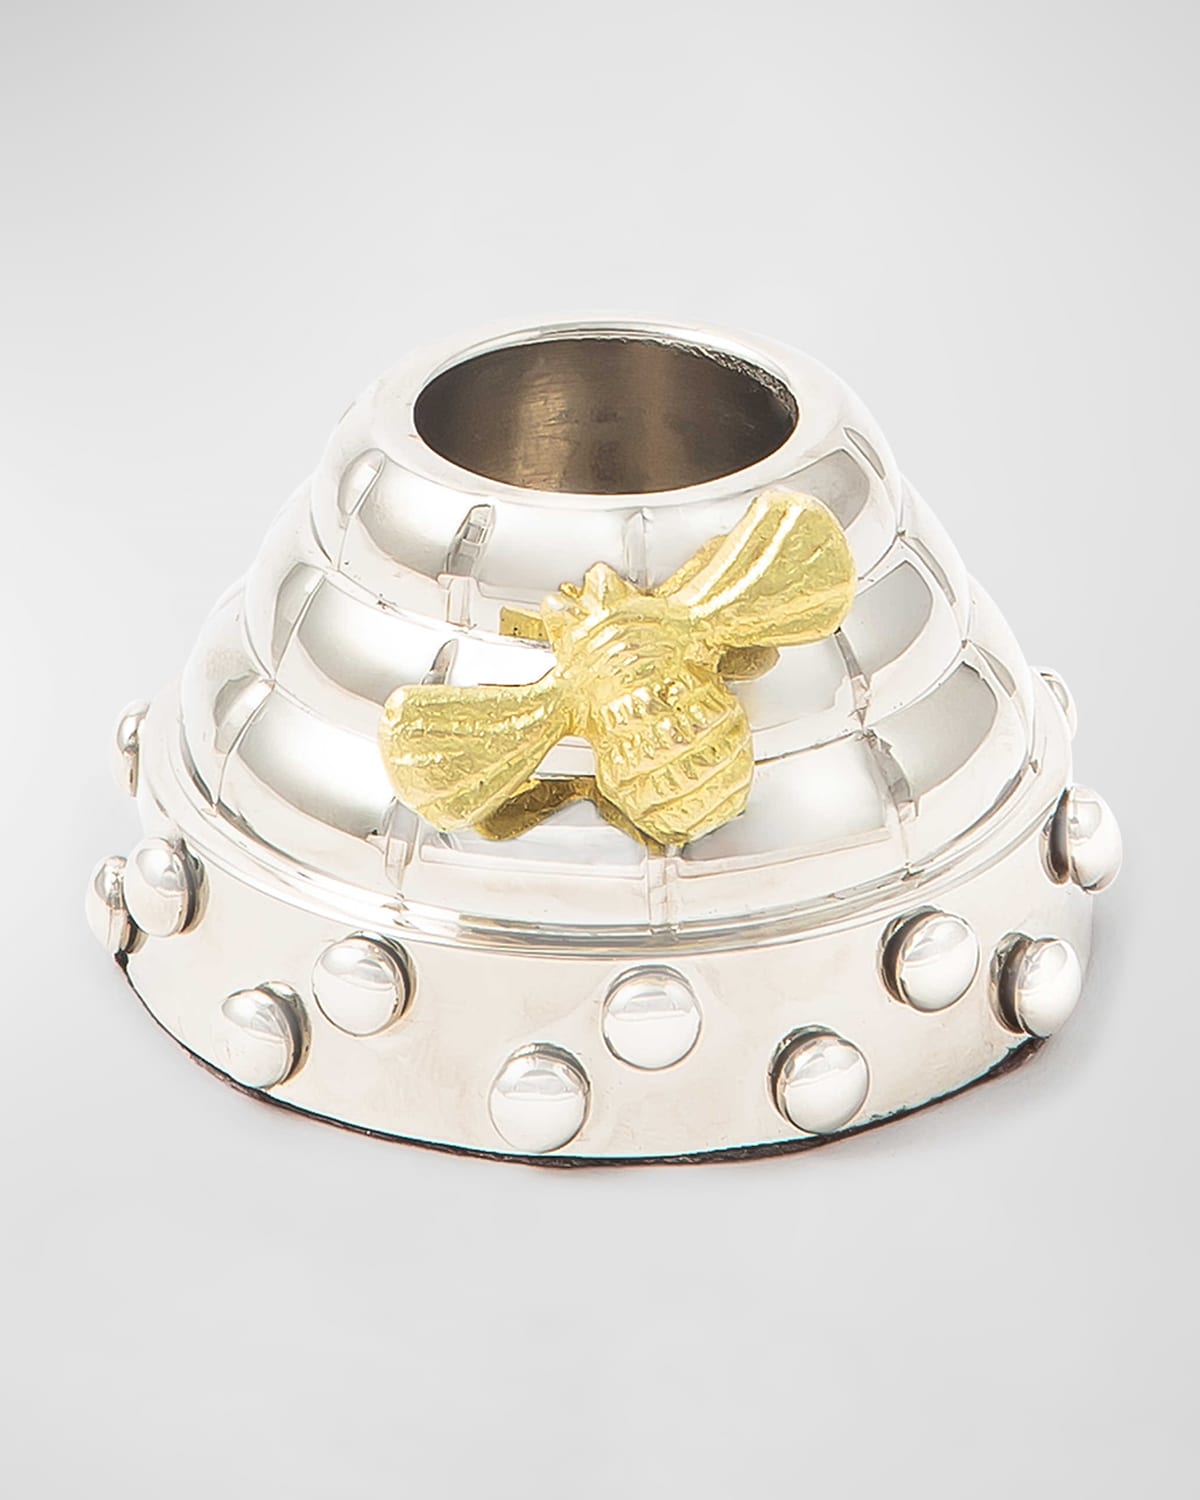 Mackenzie-childs Bee Candle Holder